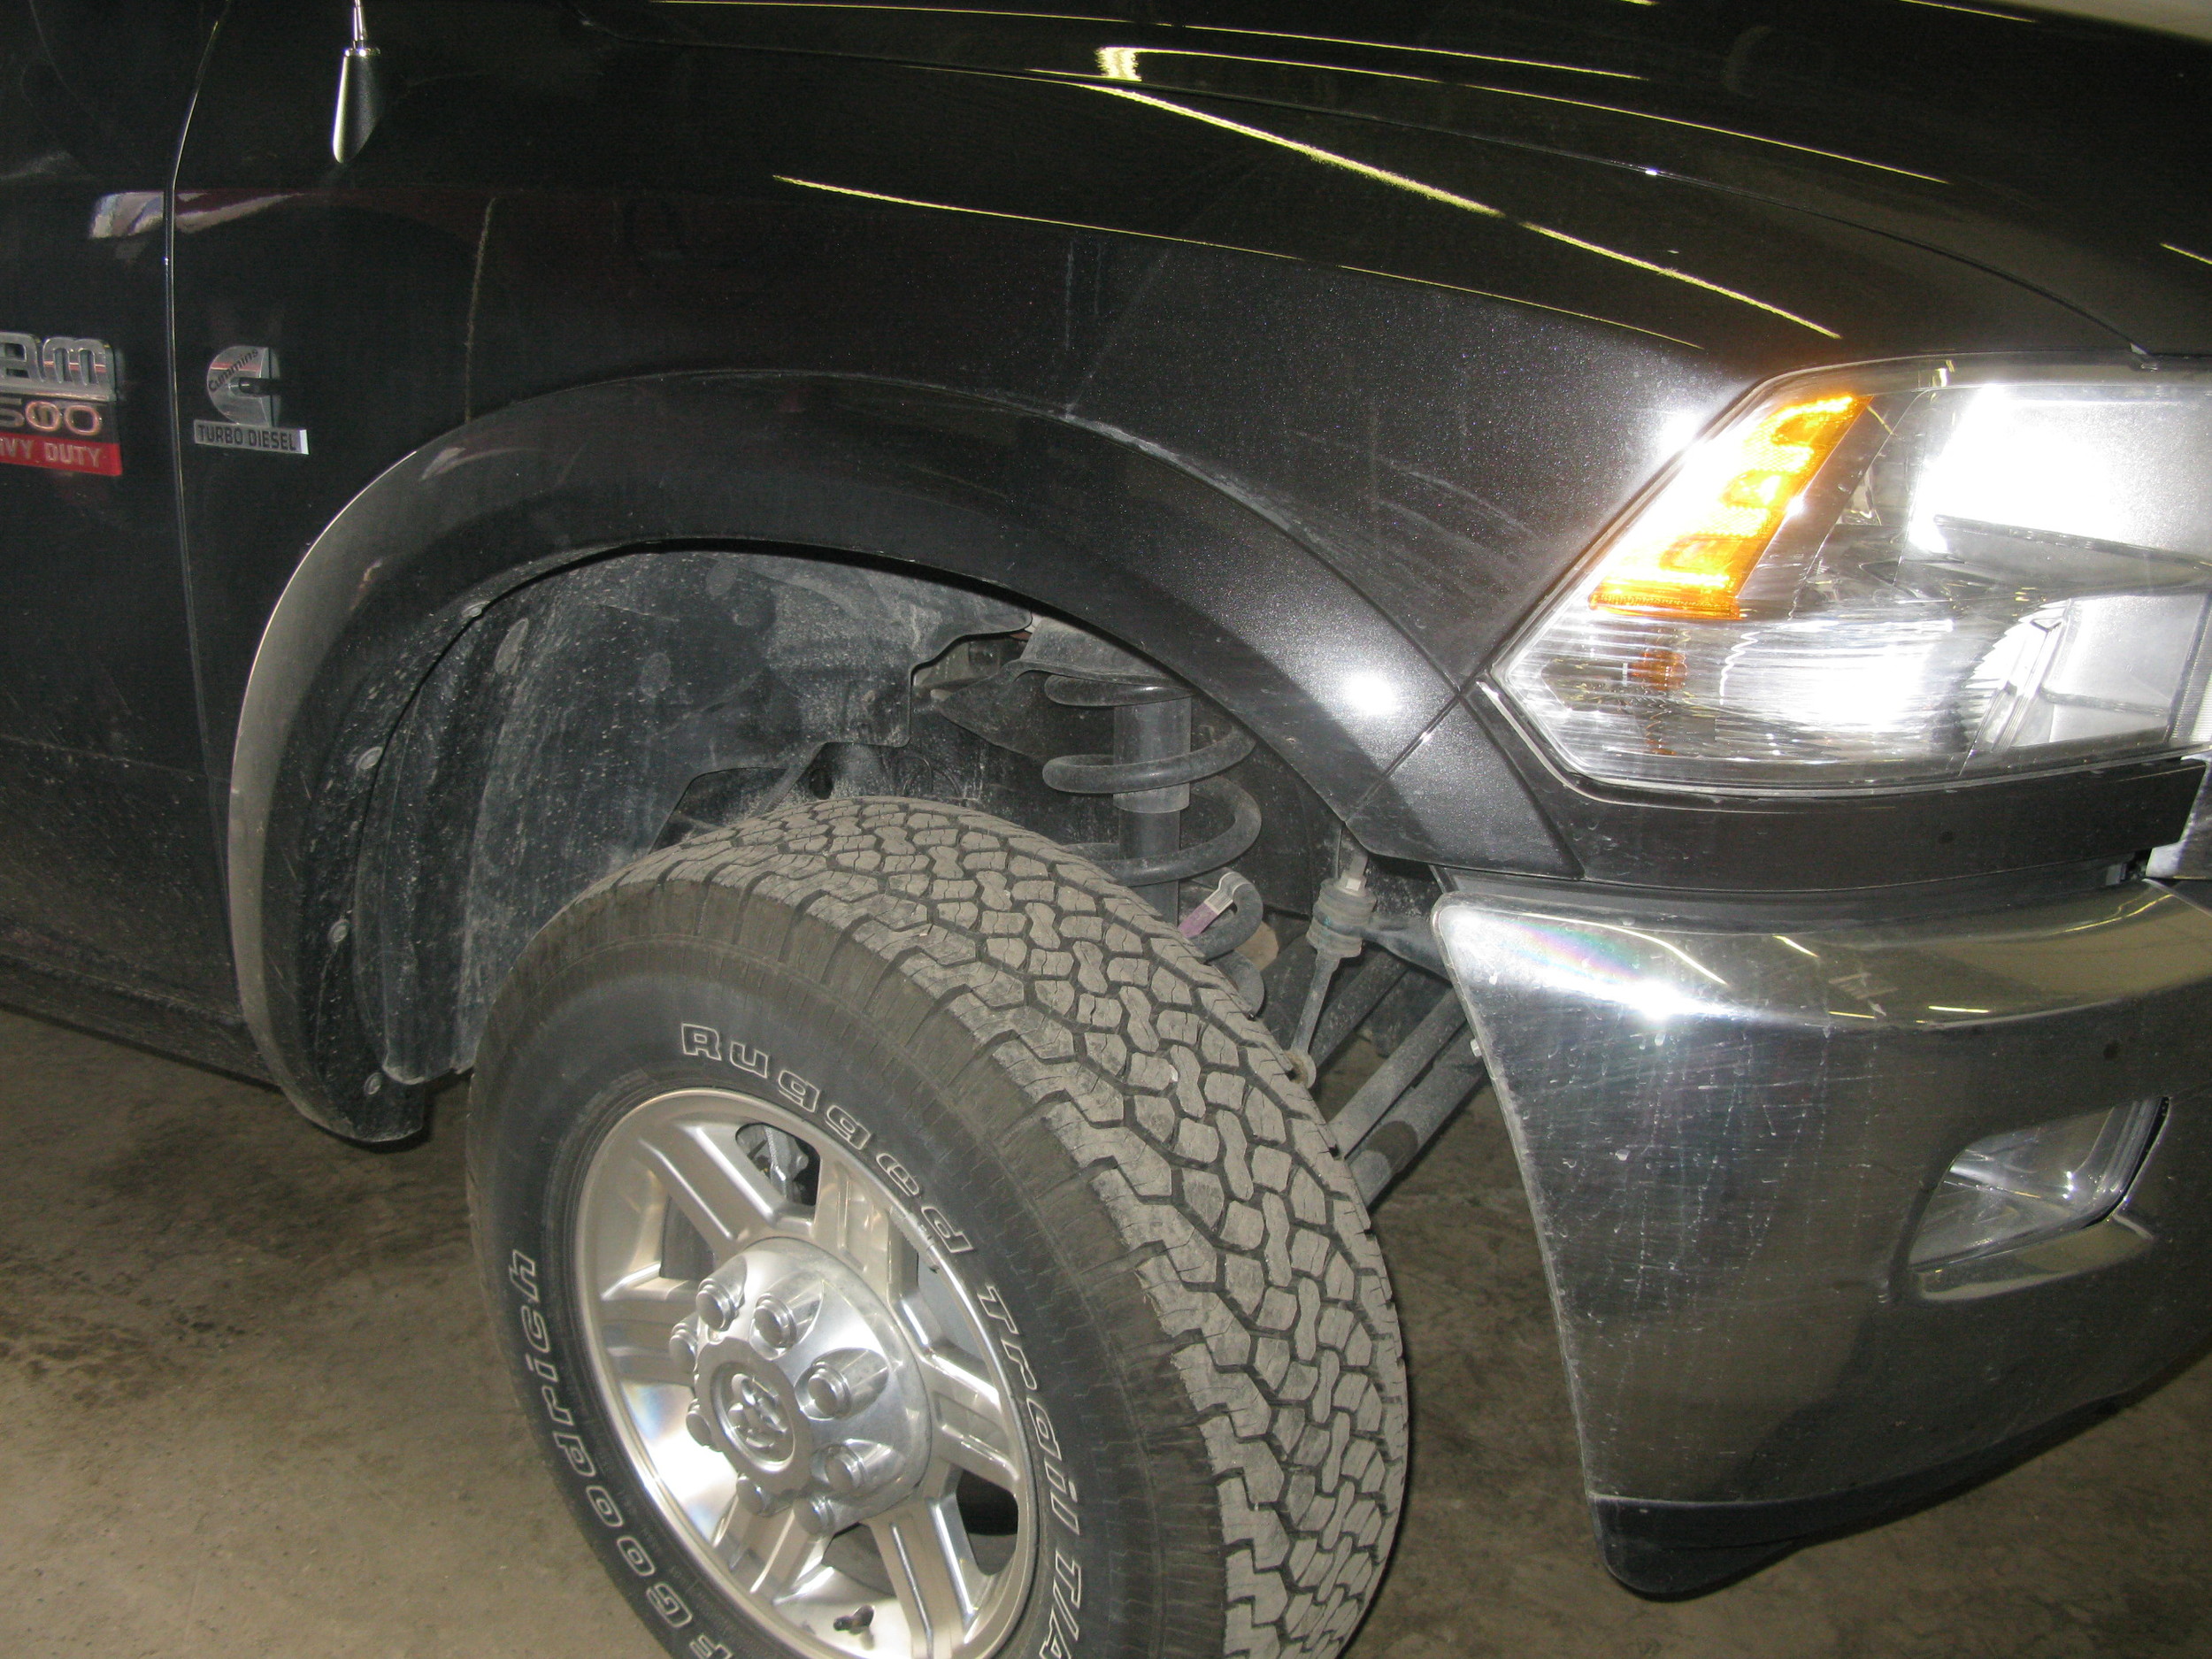 Stock flares, to be replaced with Bushwacker pocket flares